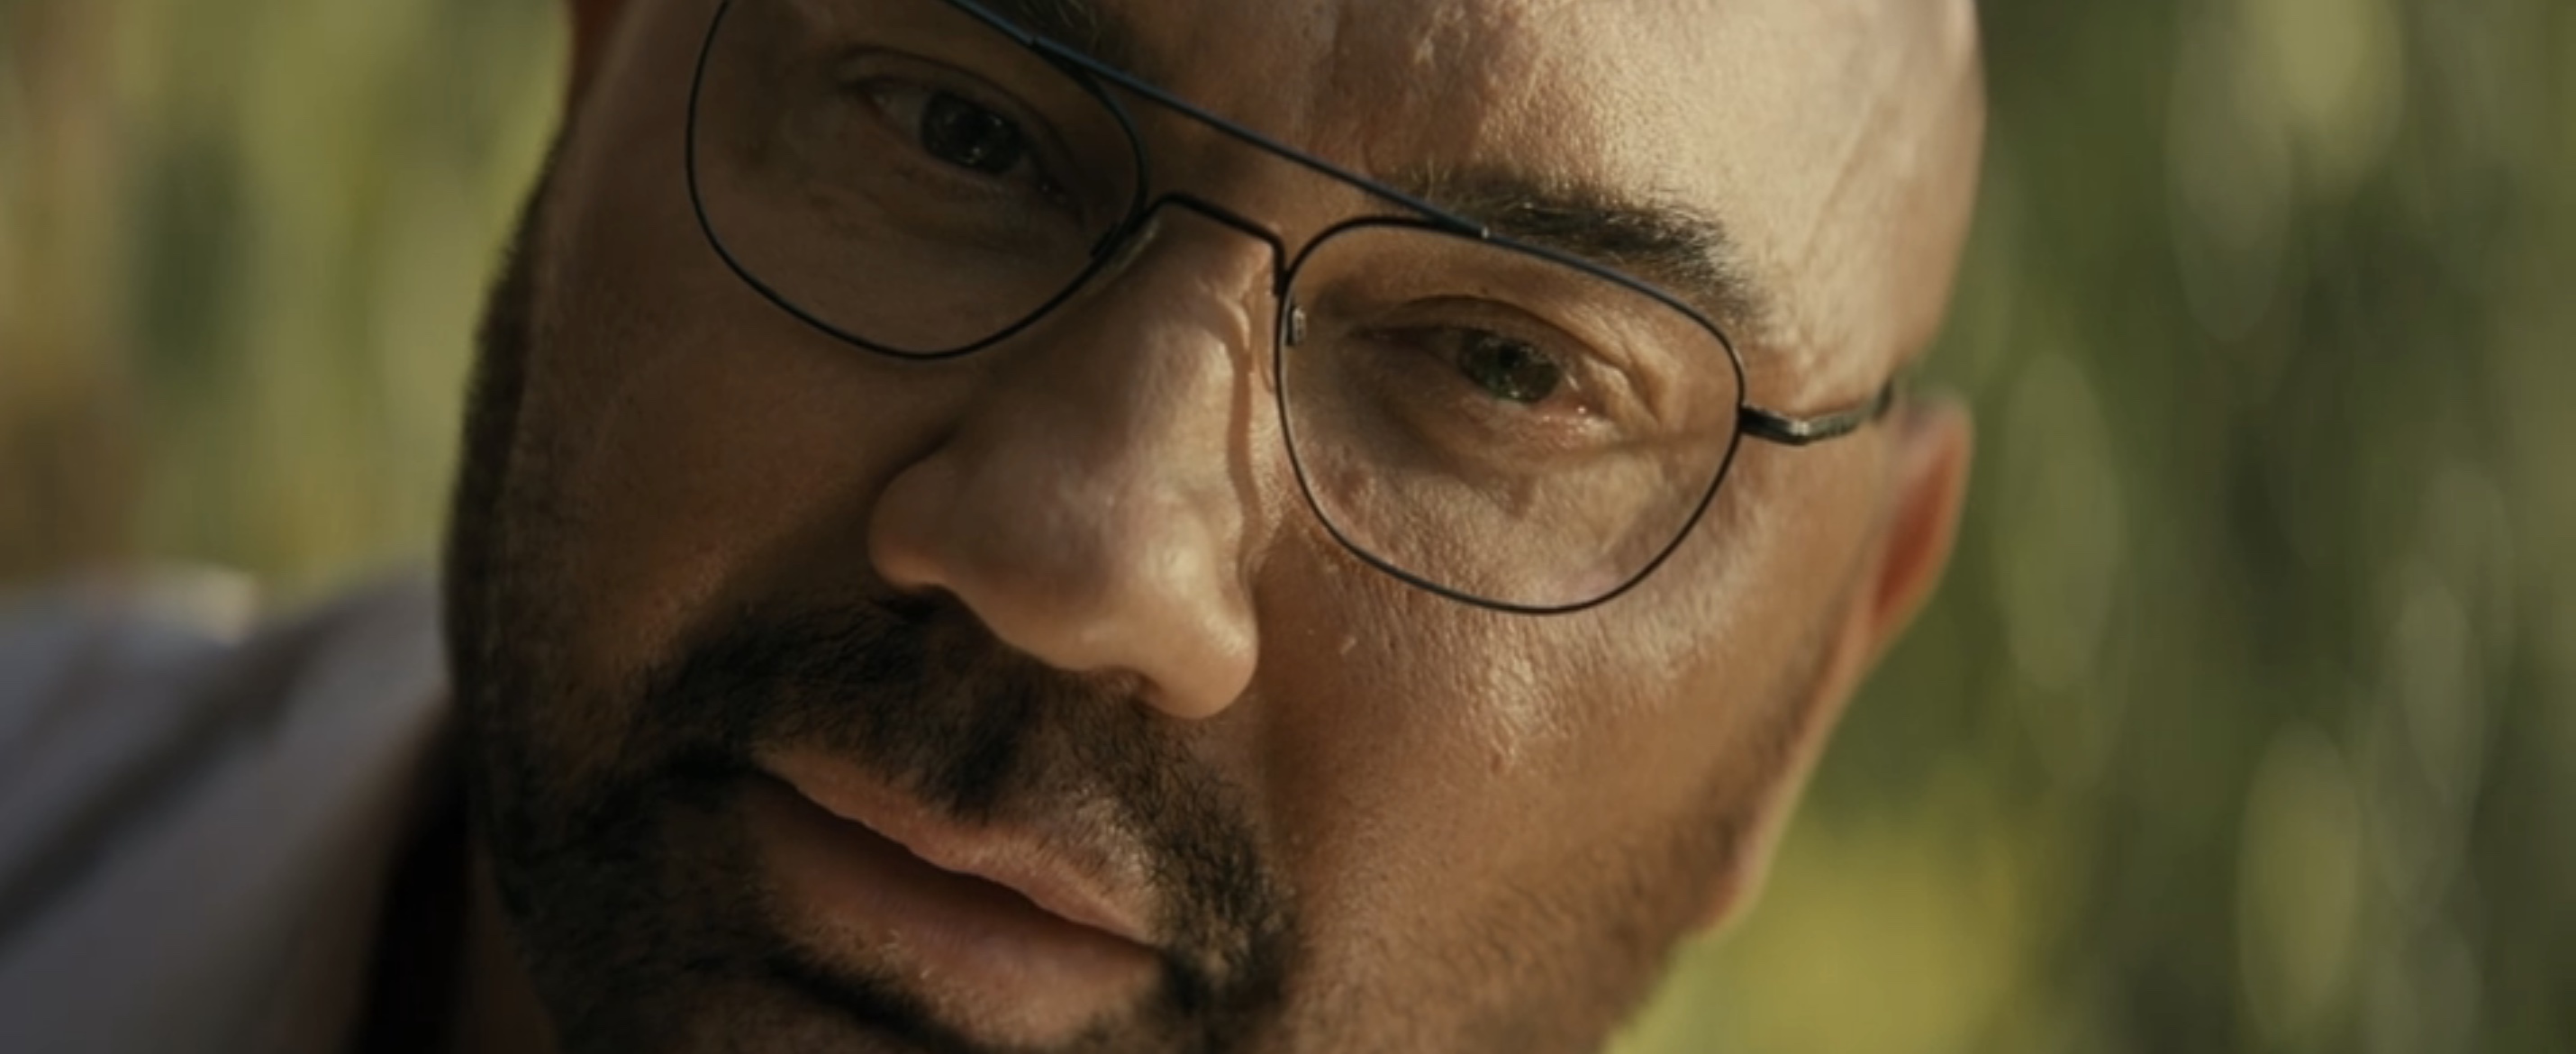 Knock at the Cabin Cast - Dave Bautista as Leonard